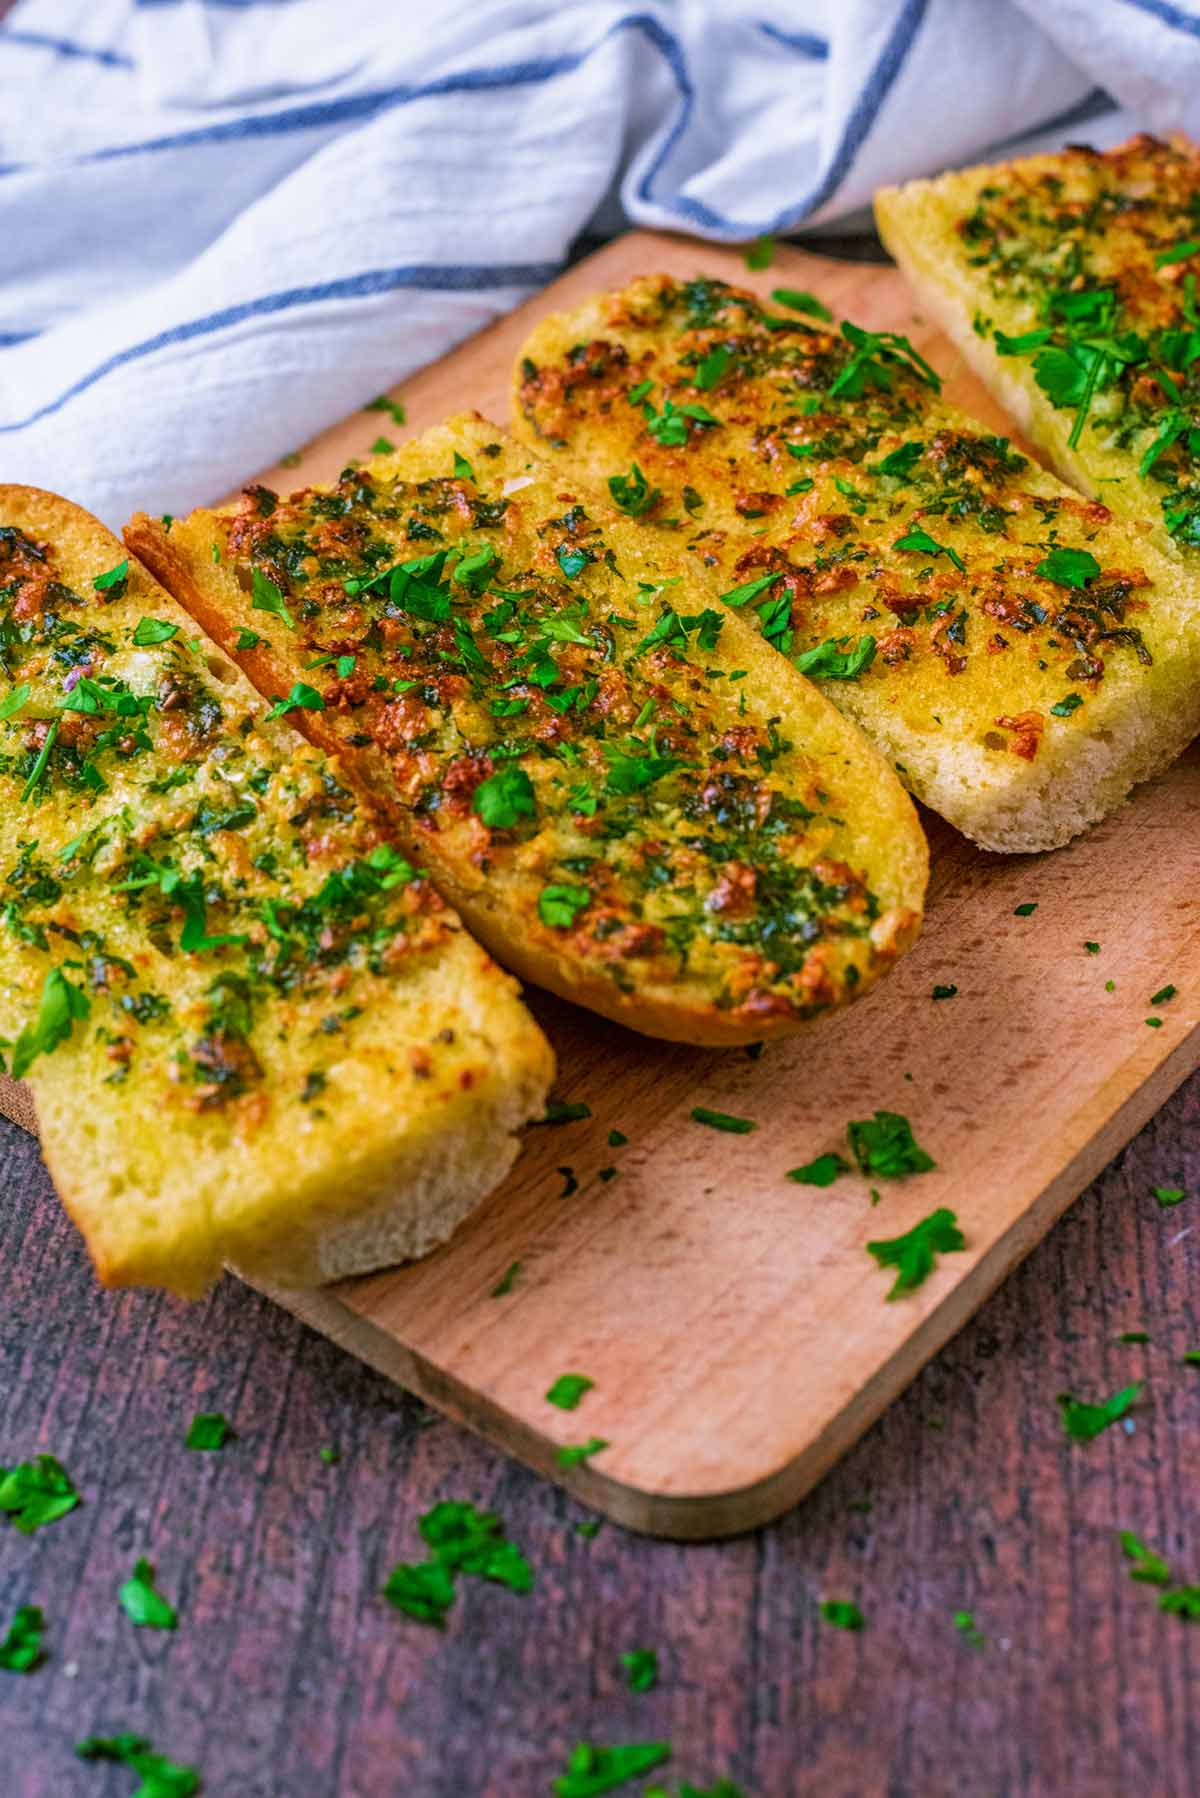 Slices of garlic bread in front of a striped towel.